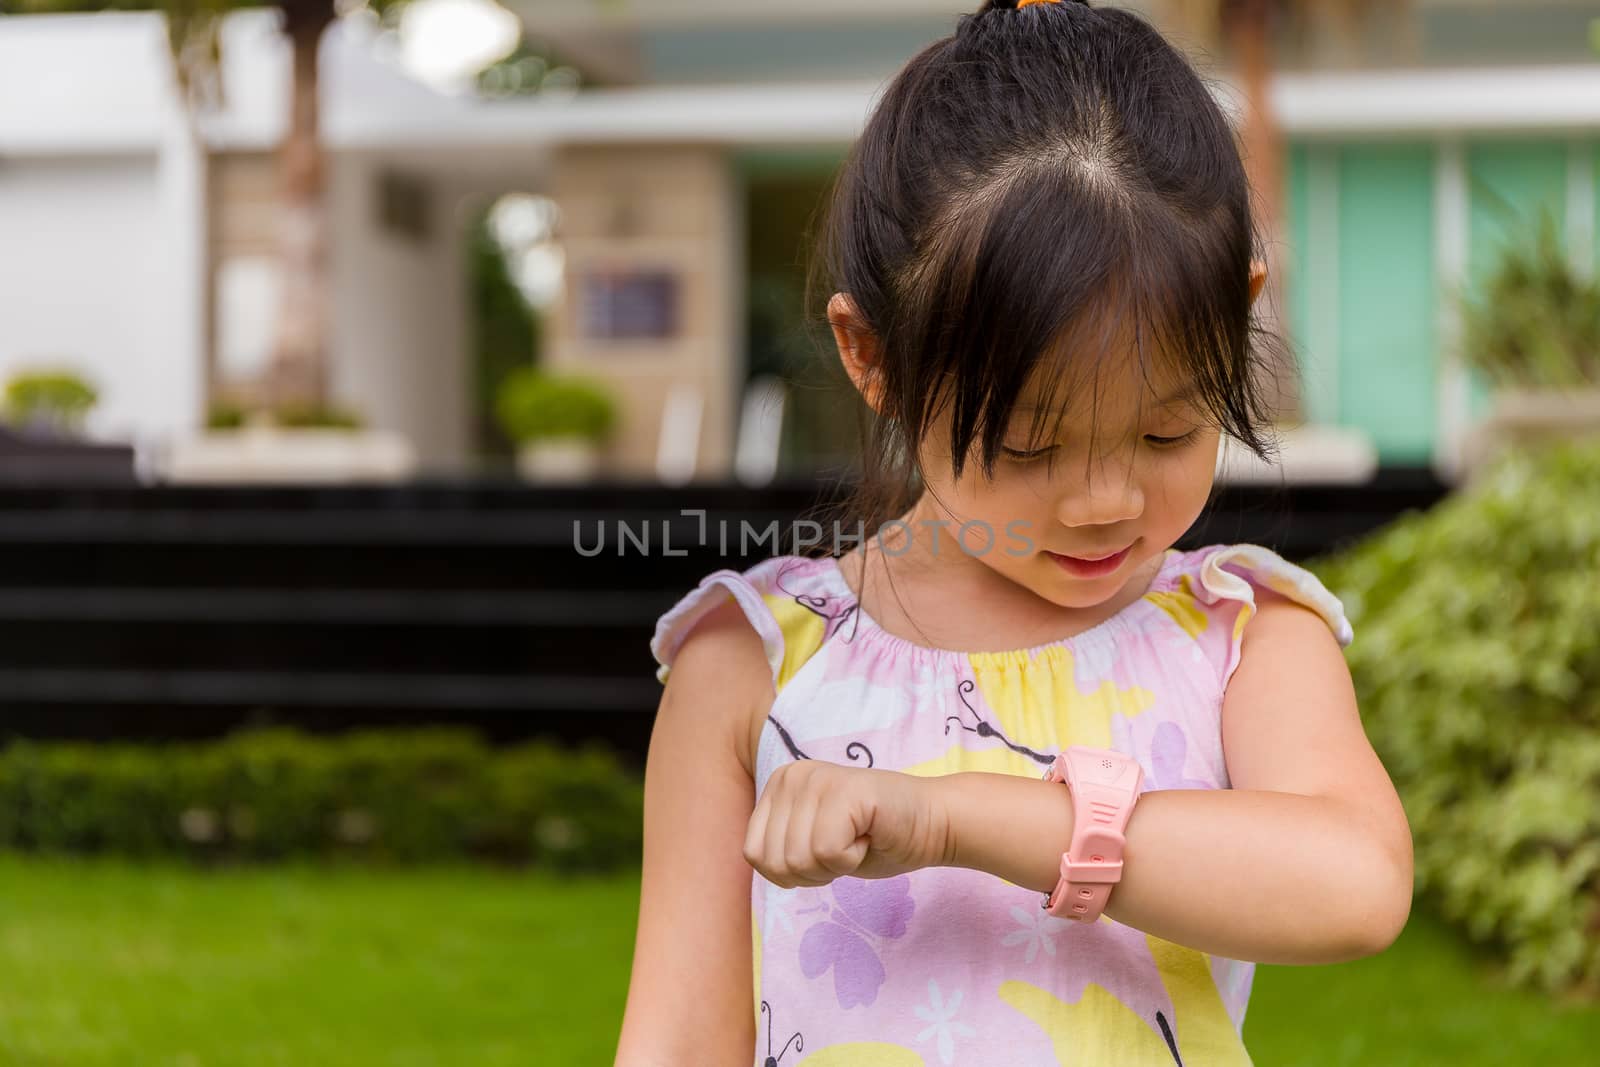 Kid Using Smartwatch or Smart Watch / Kid with Smartwatch or Sma by supparsorn